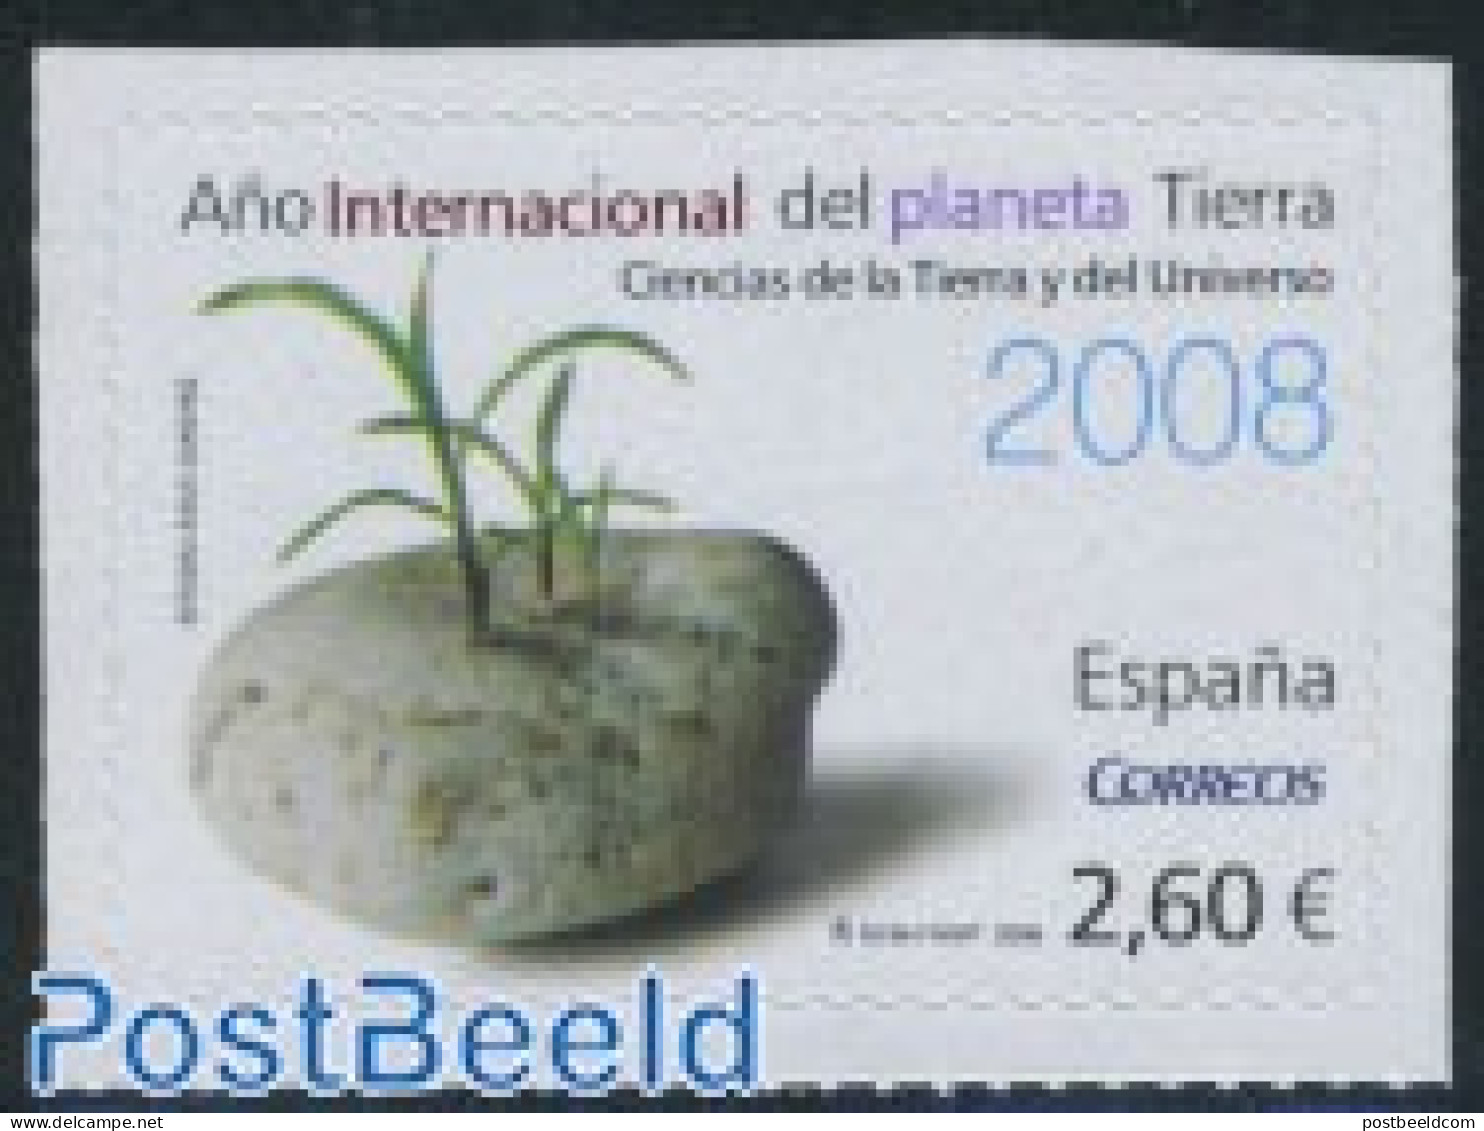 Spain 2008 Int. Year Of Planet Earth 1v S-a, Mint NH, Nature - Environment - Ungebraucht